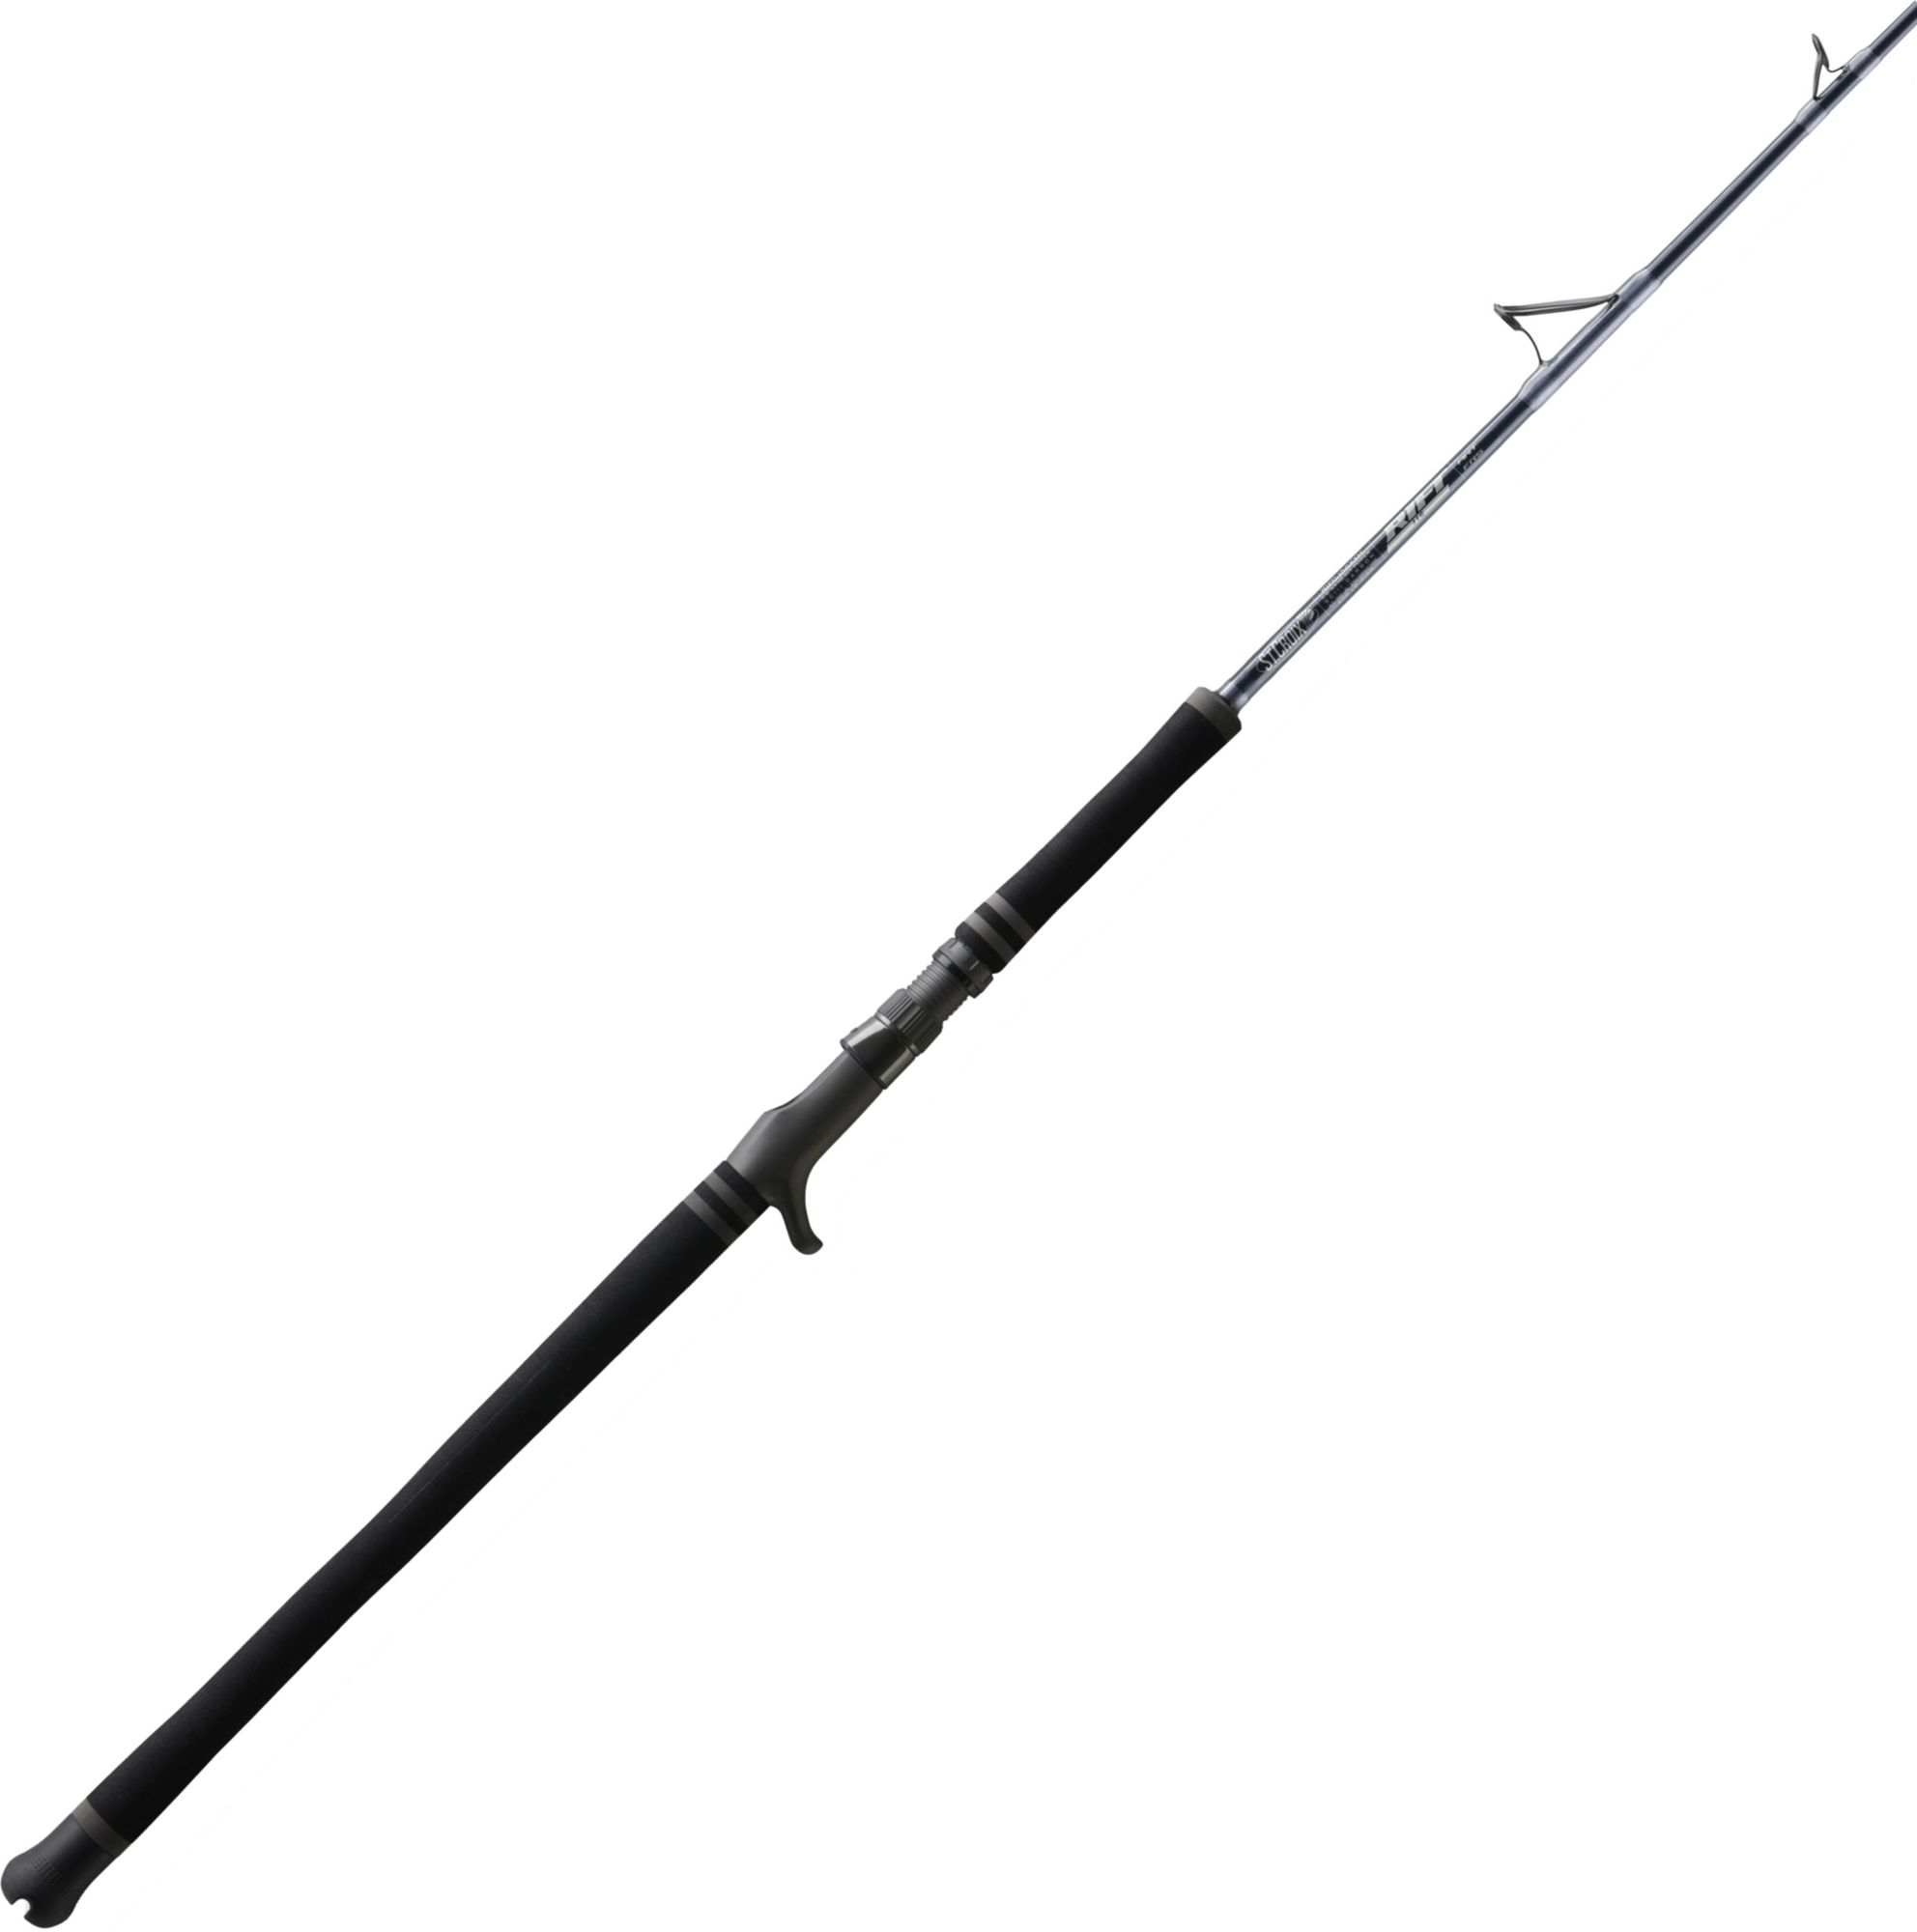 Photos - Other for Fishing St. Croix Rift Jig Conventional Rod 23SCXURFTJG5F8HCNROD 